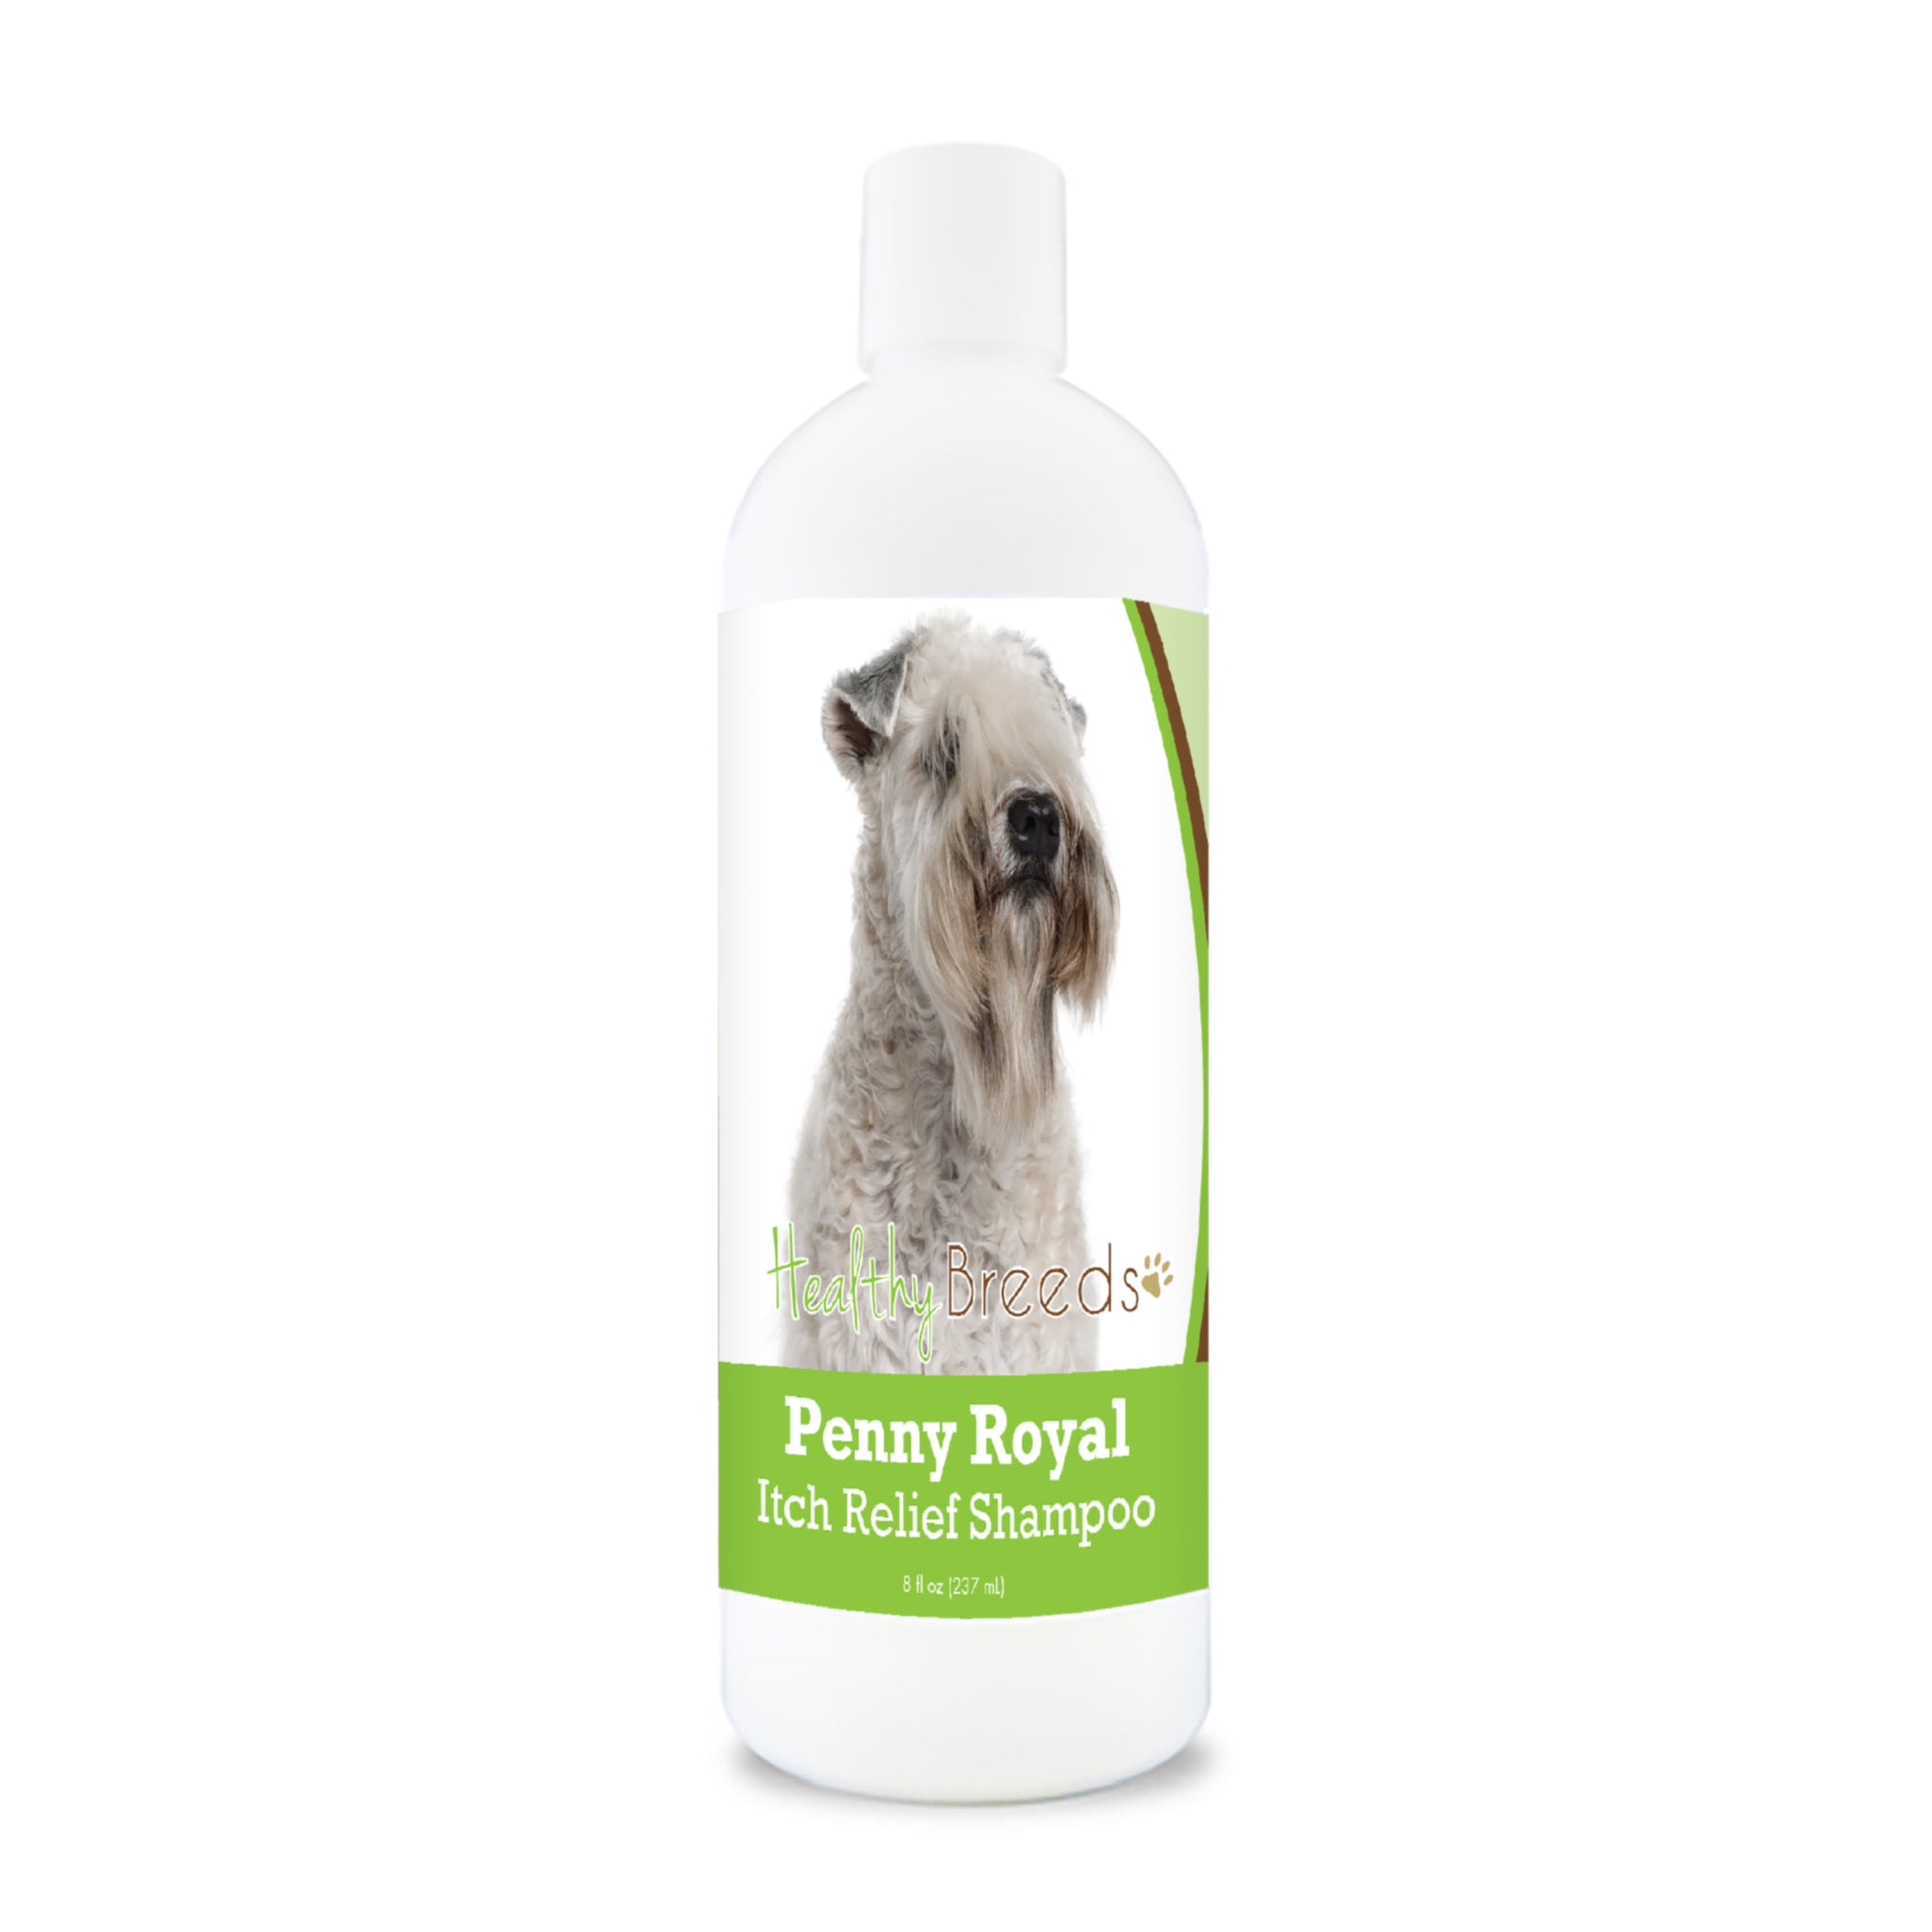 Soft Coated Wheaten Terrier Penny Royal Itch Relief Shampoo 8 oz